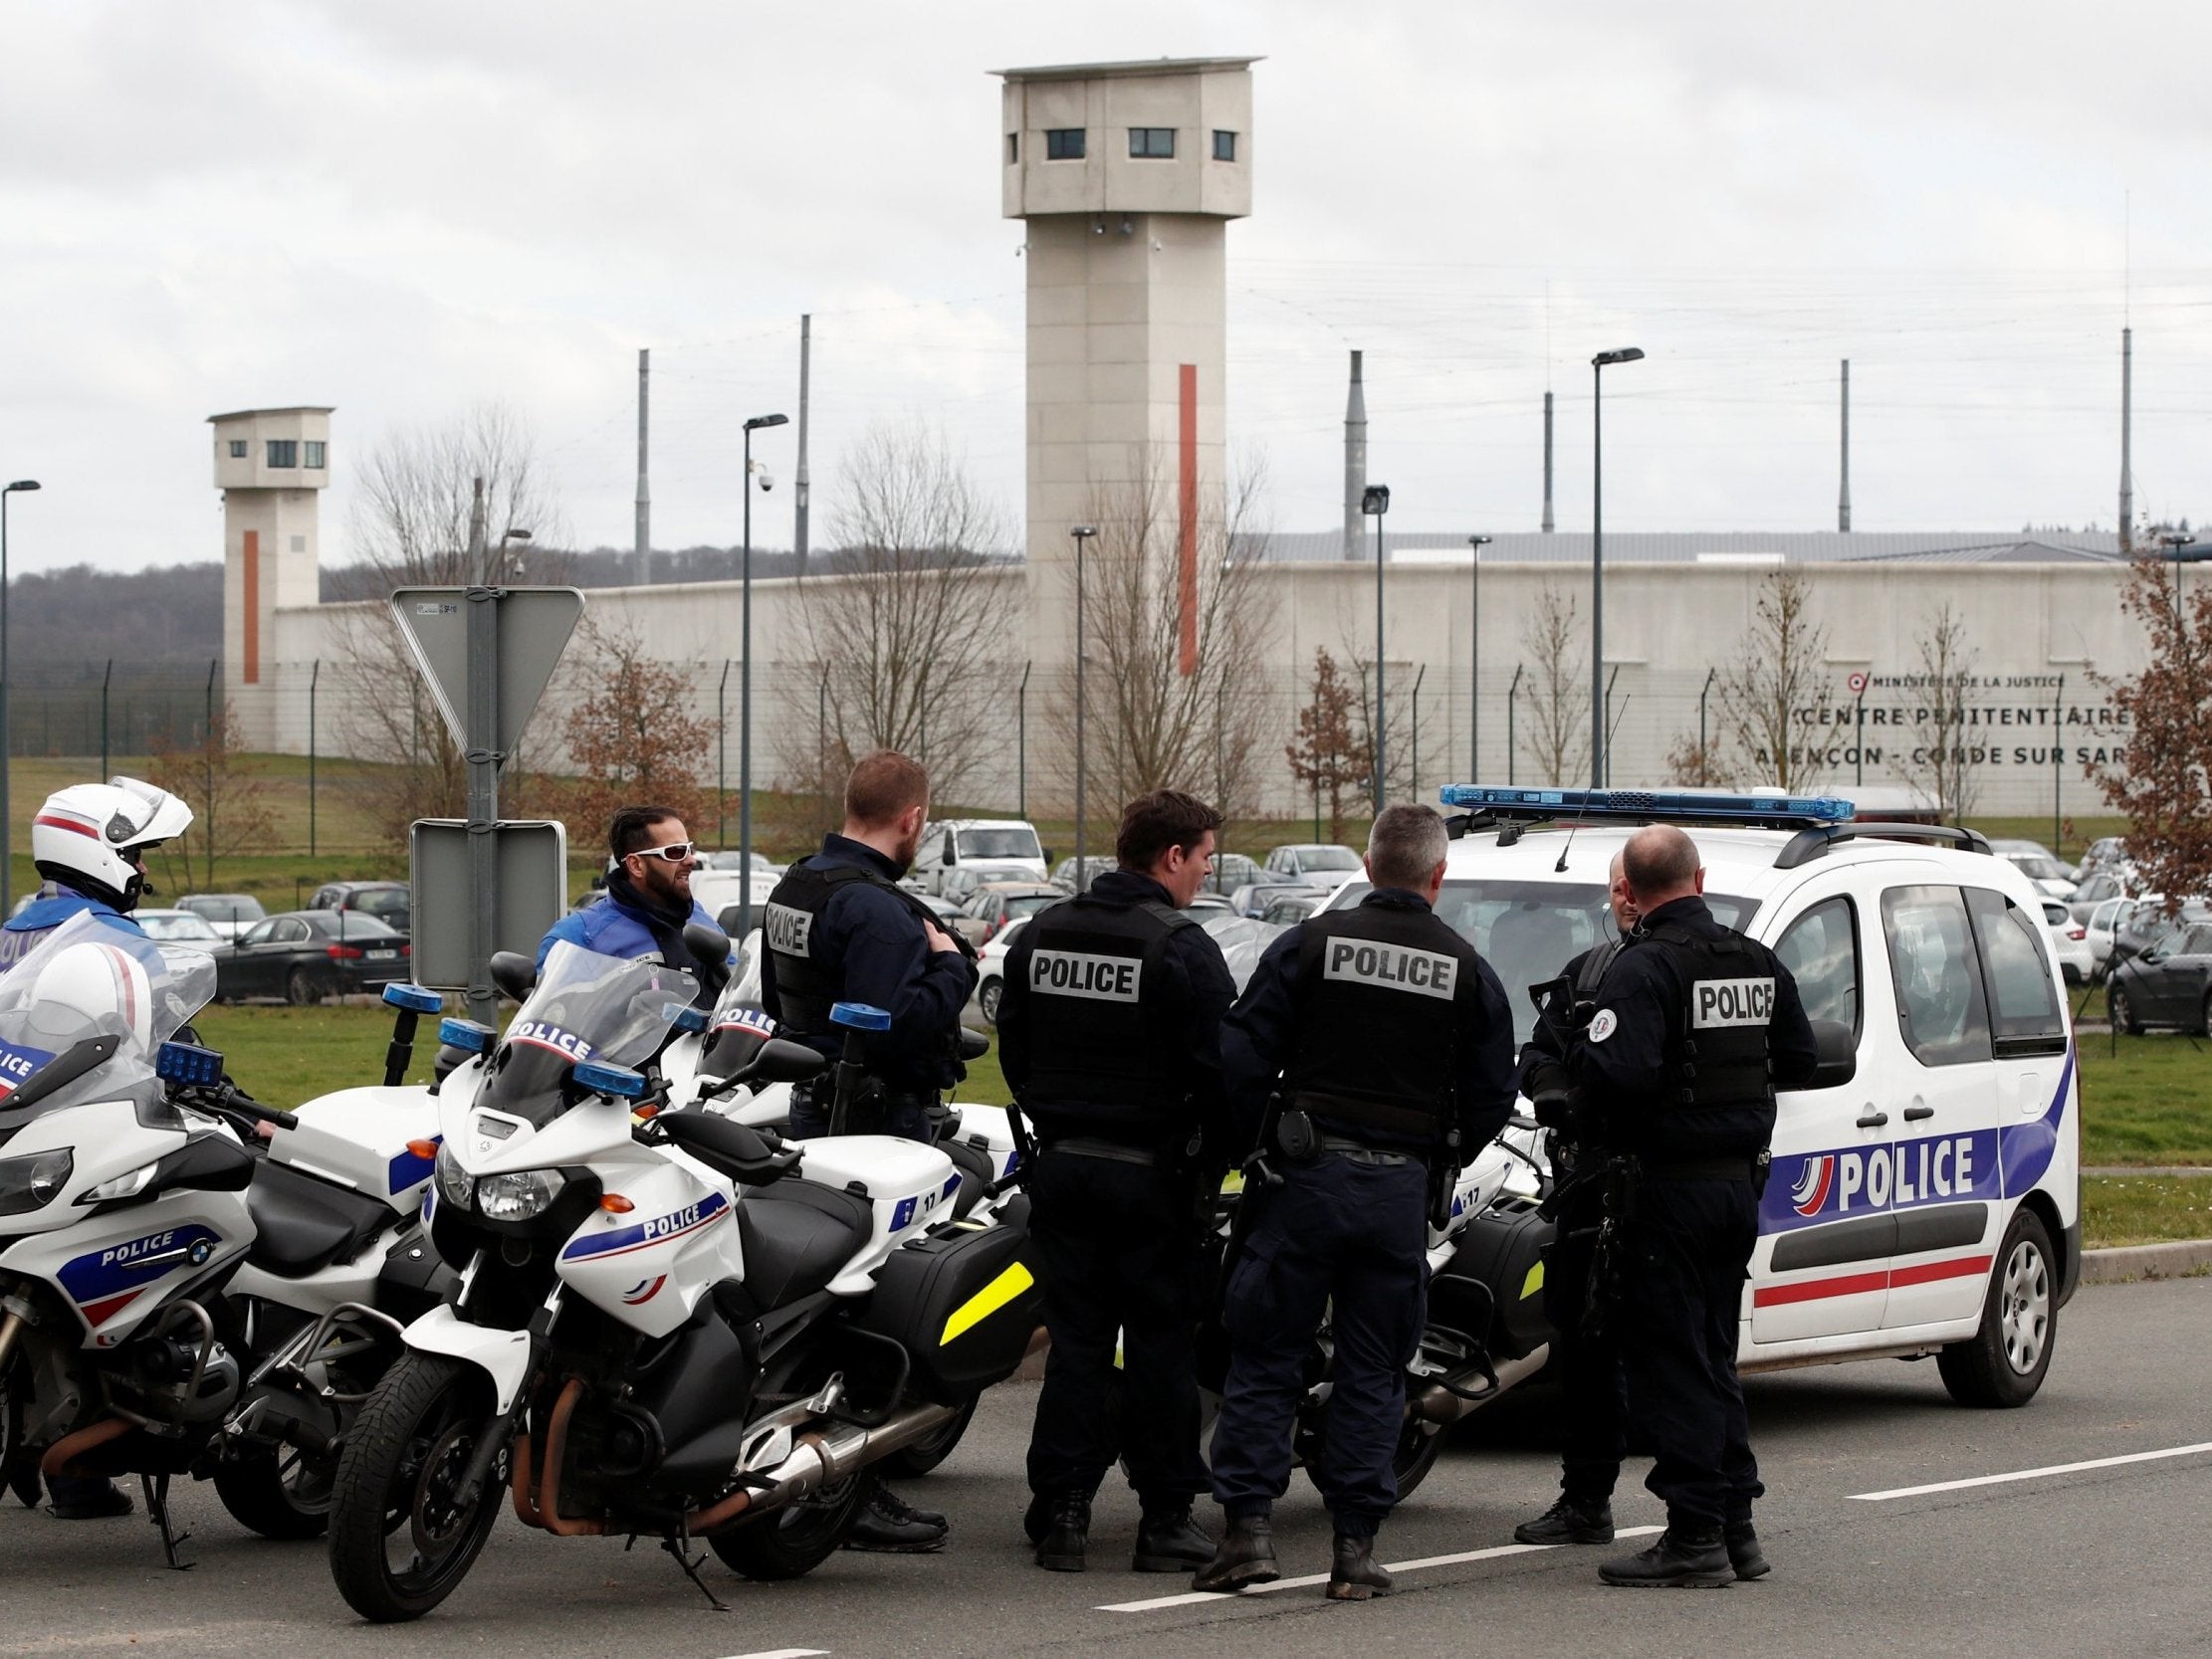 French police take position outside the prison where an inmate stabbed two guards with a knife in Conde-sur-Sarthe, France, on 5 March 2019.